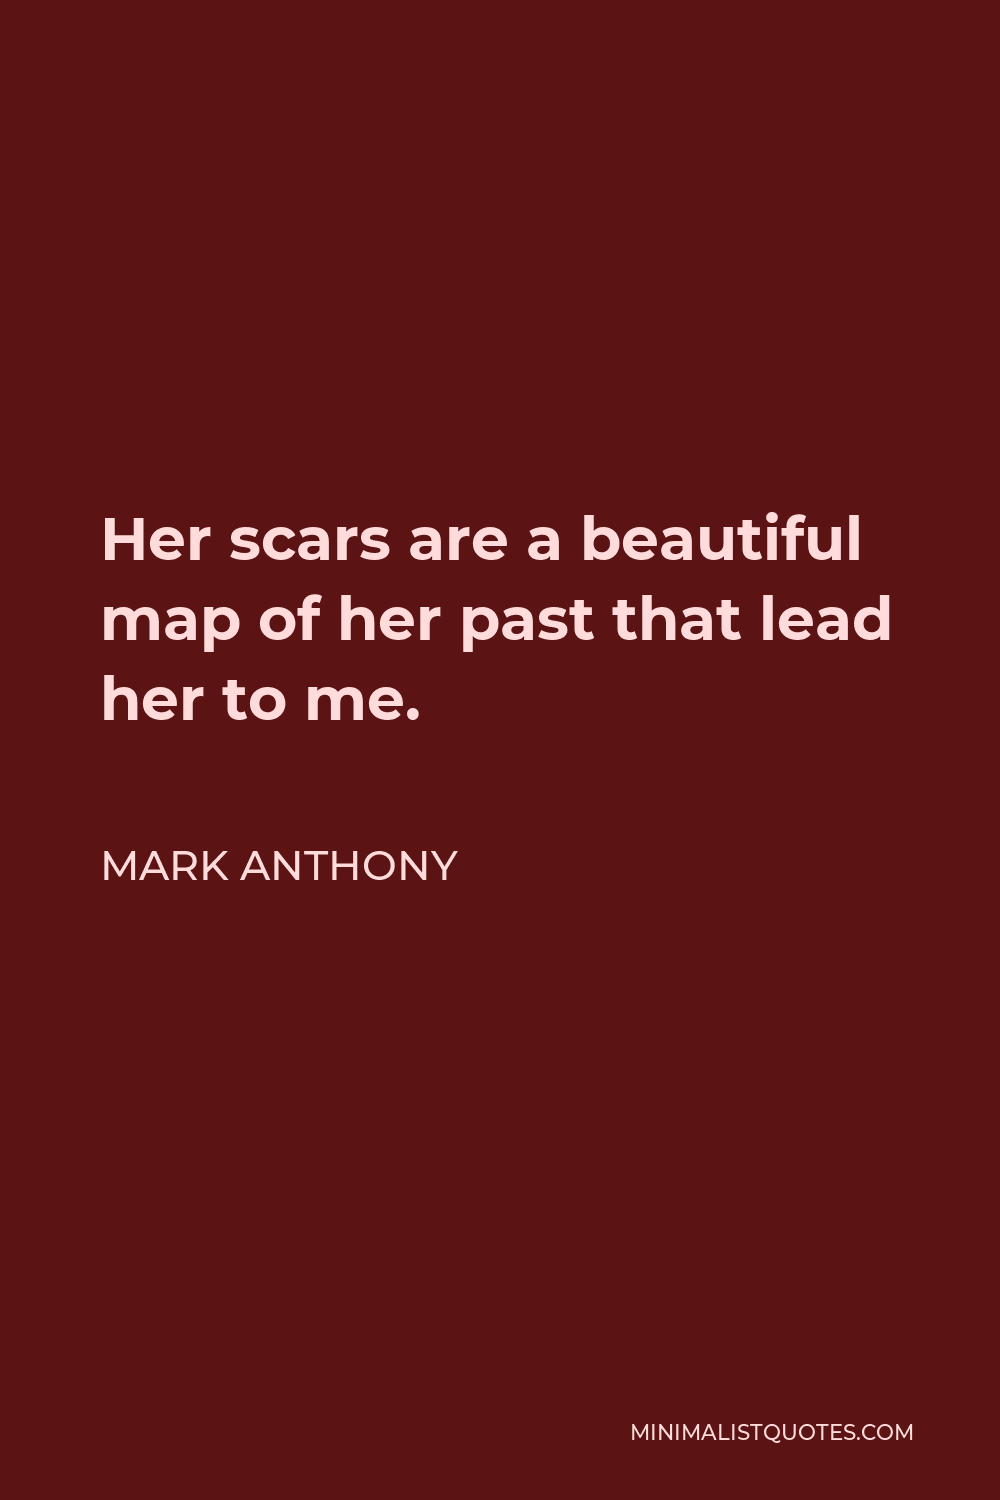 Mark Anthony Quote - Her scars are a beautiful map of her past that lead her to me.